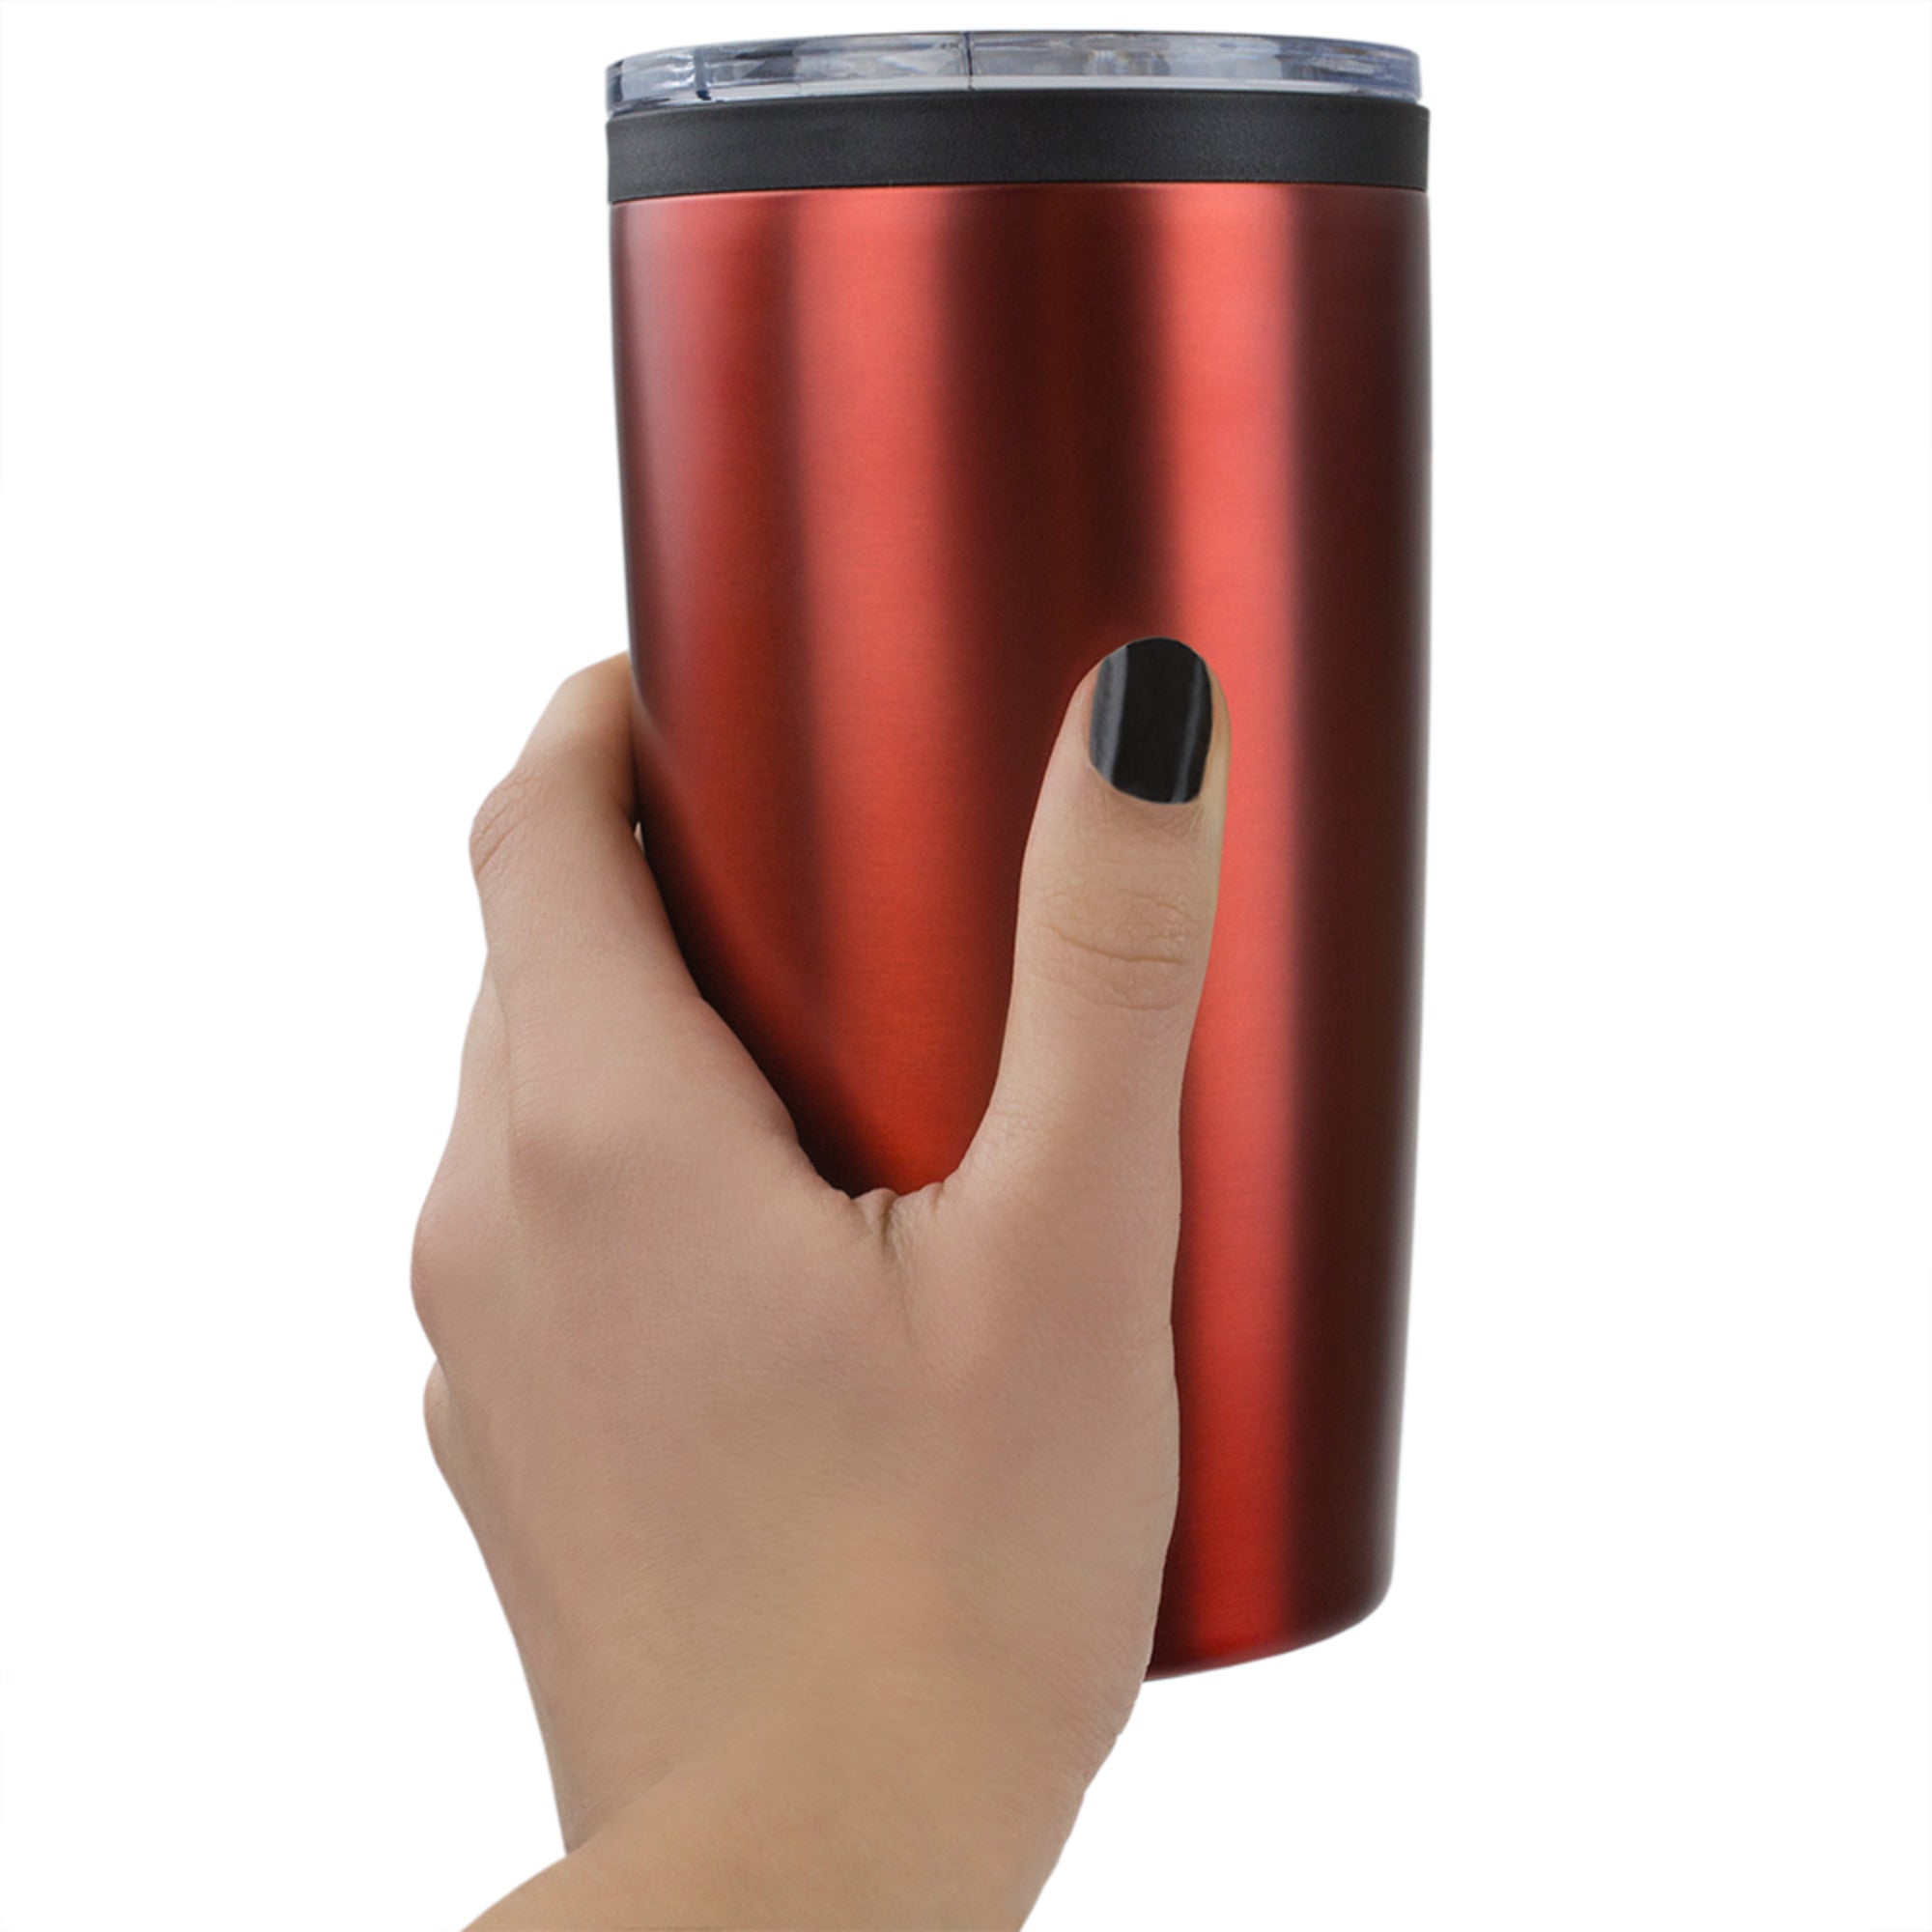 Home Basics 20 oz. Stainless Steel Travel Mug with Non-Slip Base - Assorted Colors